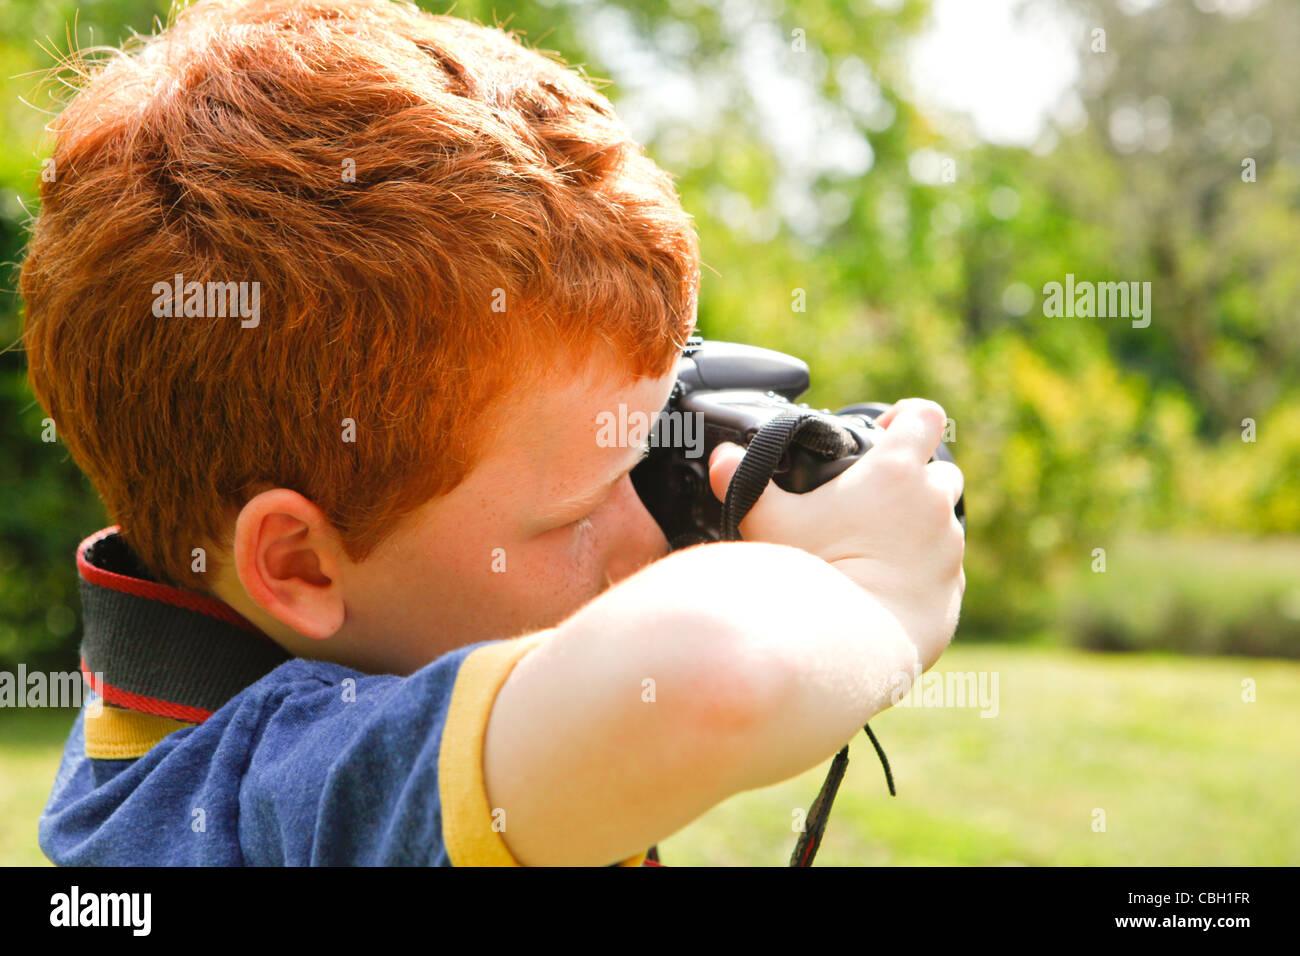 A Young boy, aged 7, using a digital SLR camera in a sunny garden. Stock Photo